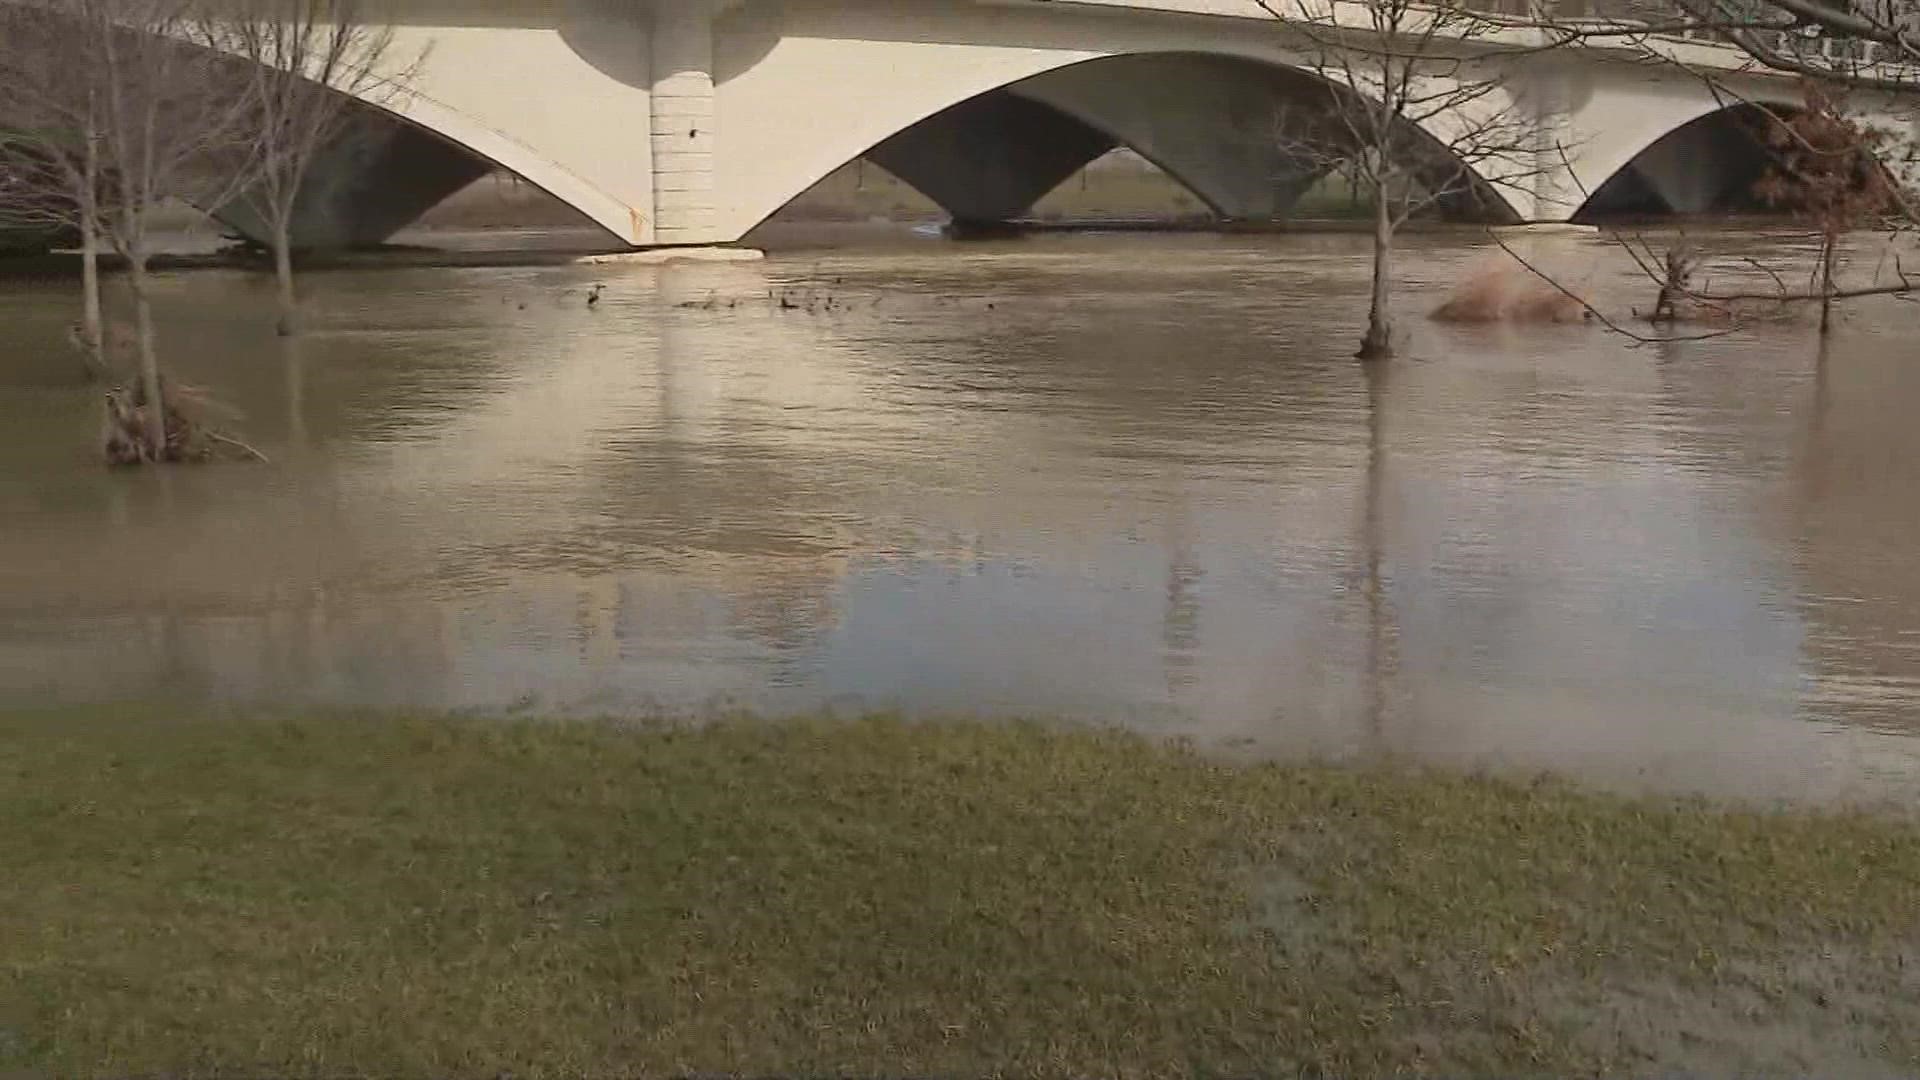 Flooding in certain areas has made some bike paths and trails near the river impassable.